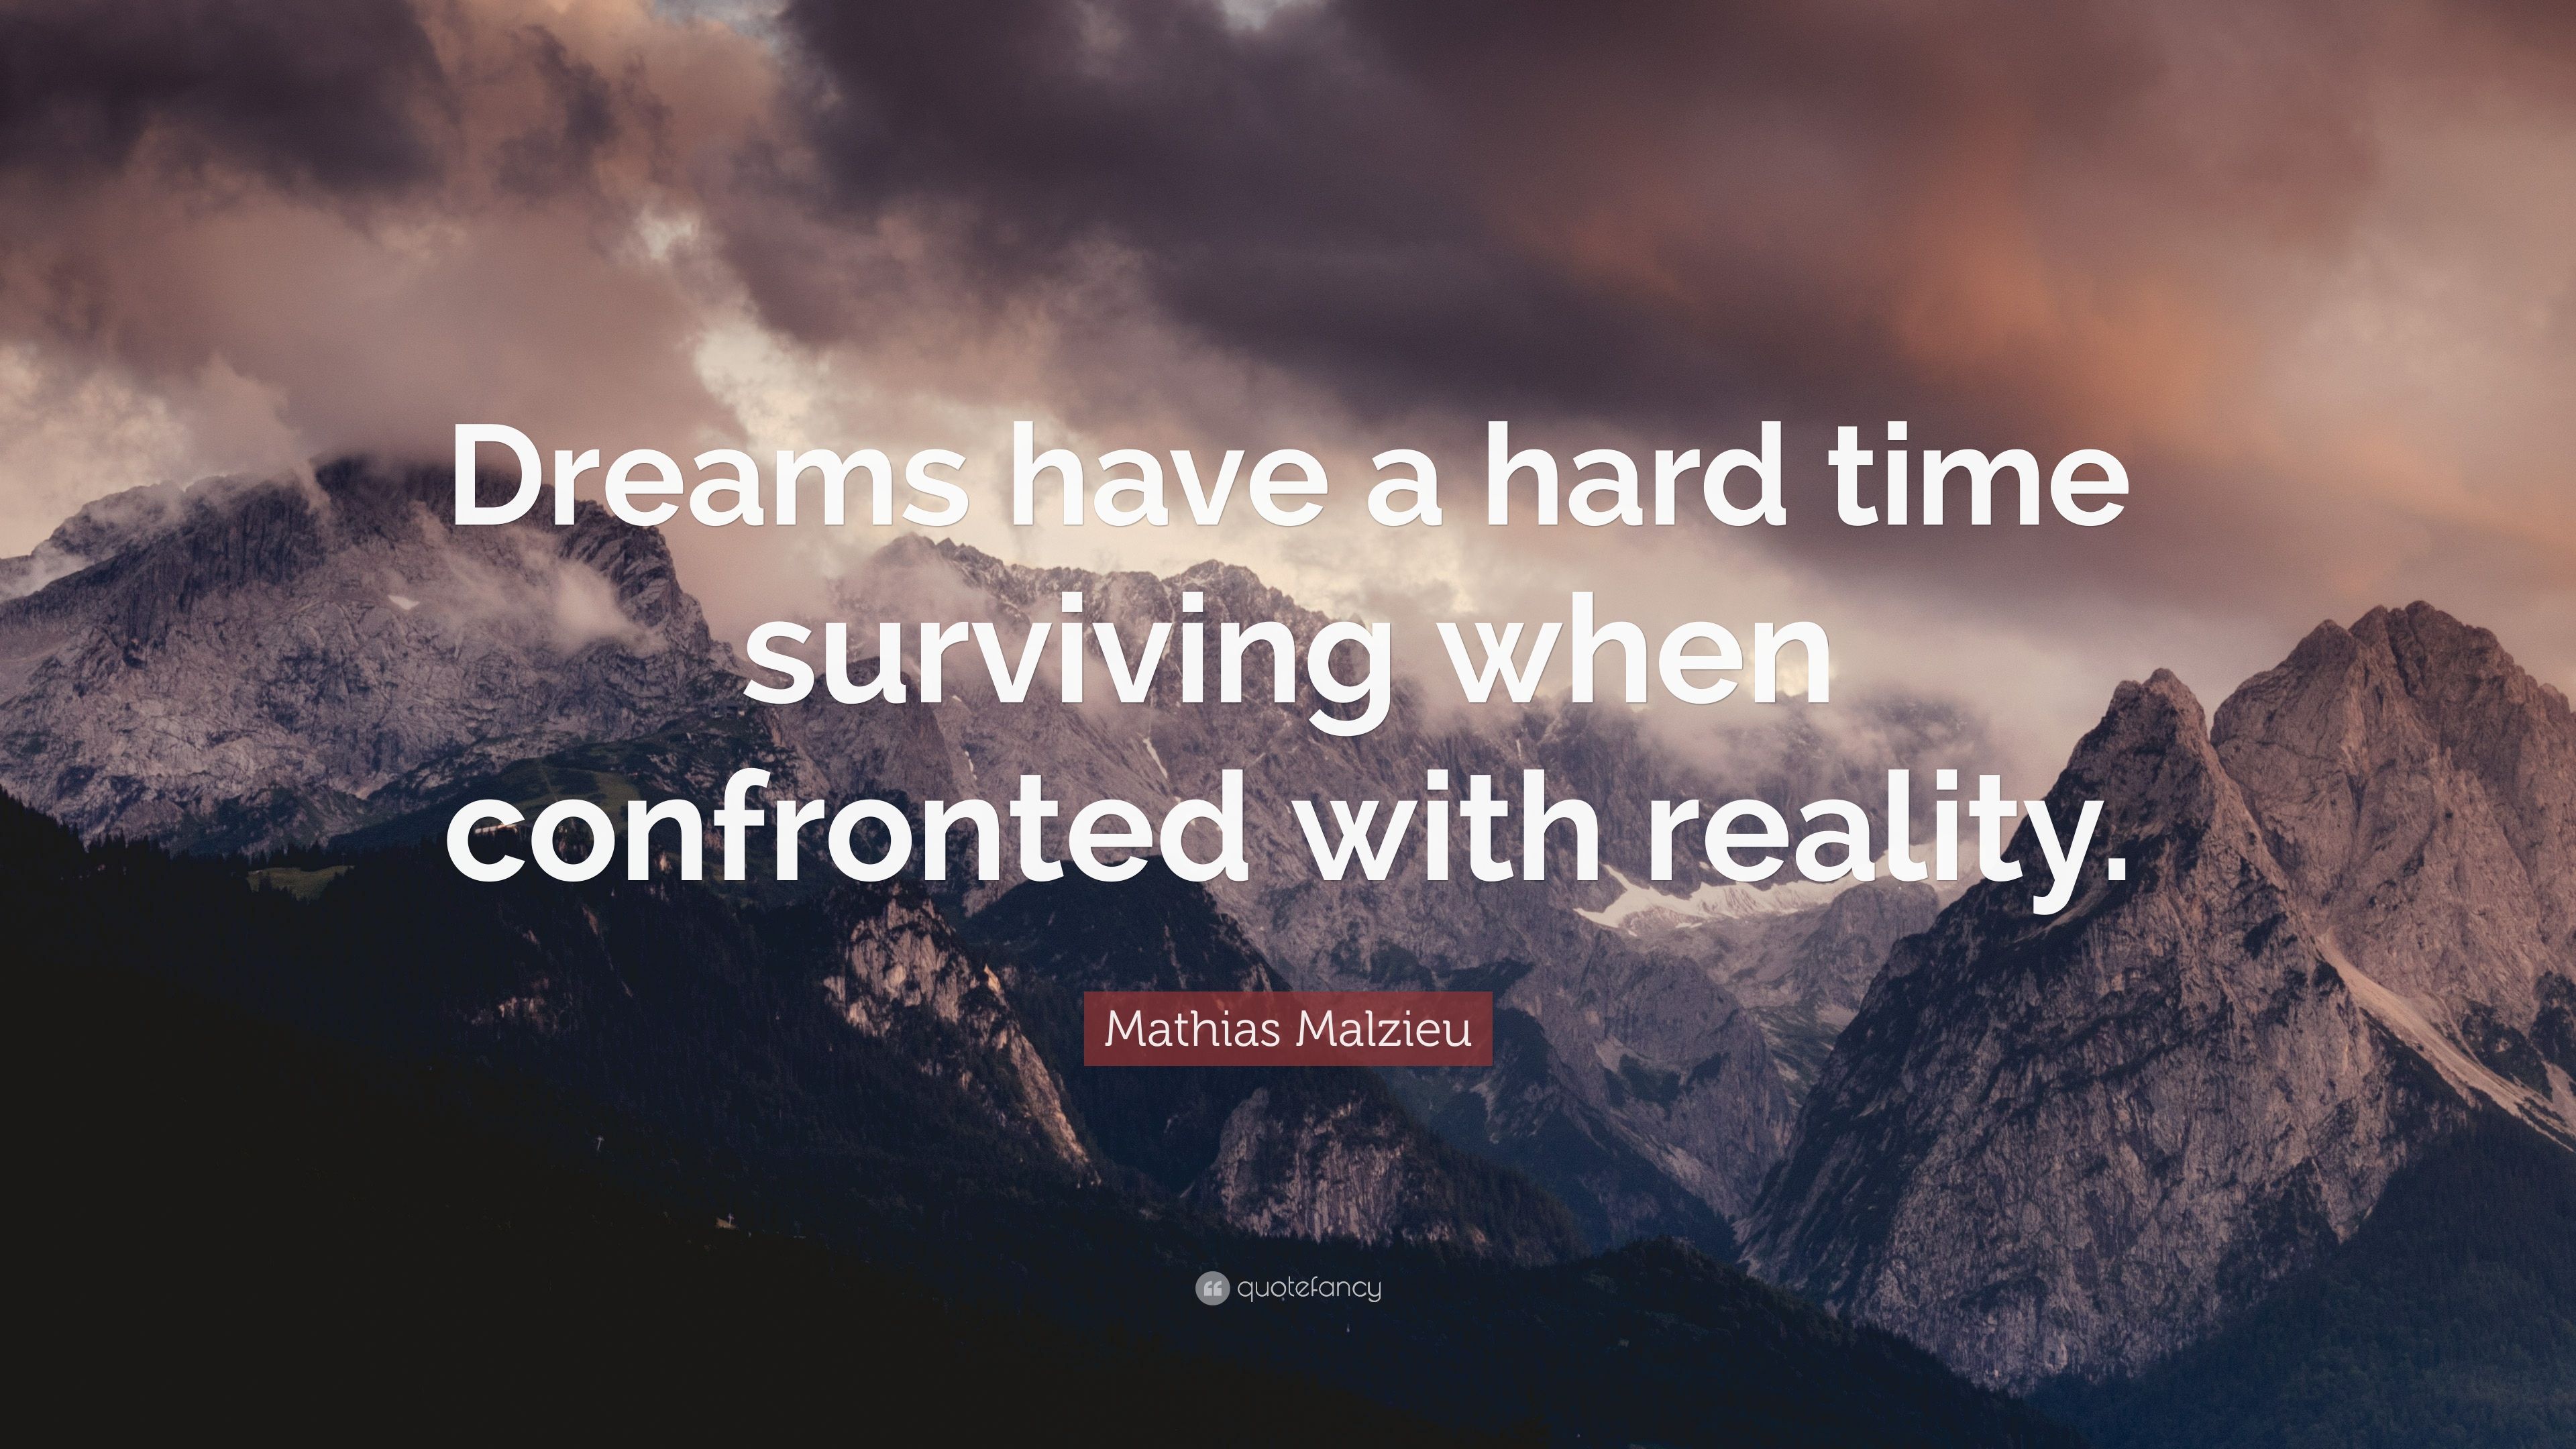 Mathias Malzieu Quote: “Dreams have a hard time surviving when confronted with reality.” (7 wallpaper)